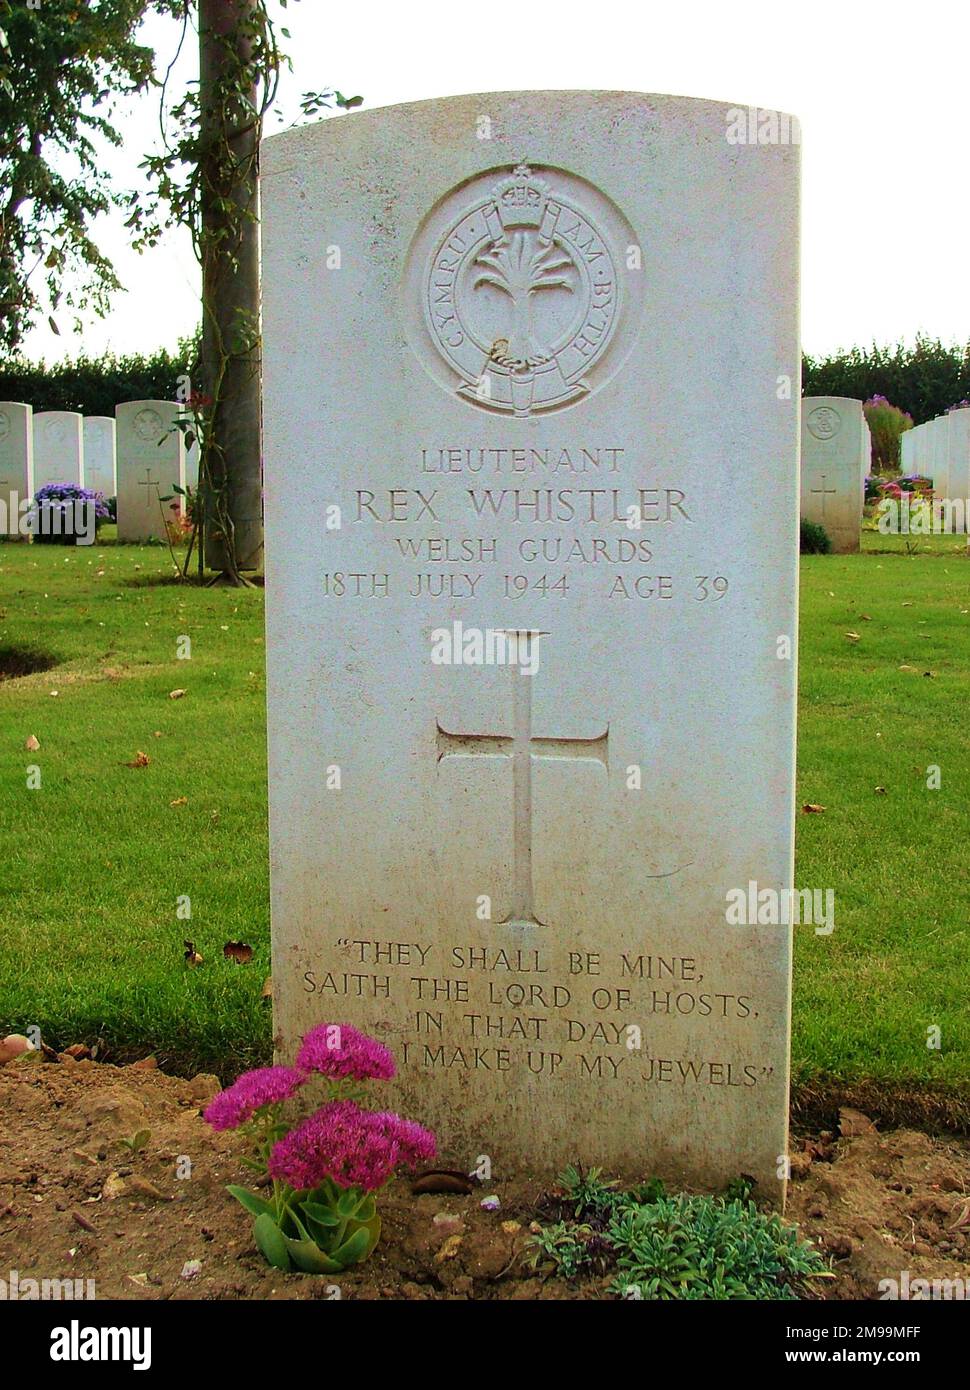 Whistler is buried in the Commonwealth War Graves Cemetery at Banneville la Campagne. There are 2,175 burials mostly from the fighting for Caen and the Falaise Gap. Whistler was killed on 18 July 1944 on his first day in action. Following education at the Slade School of Art, he joined the Welsh Guards Armoured Division at the beginning of the war and continued to work as a professional artist during his service. Stock Photo